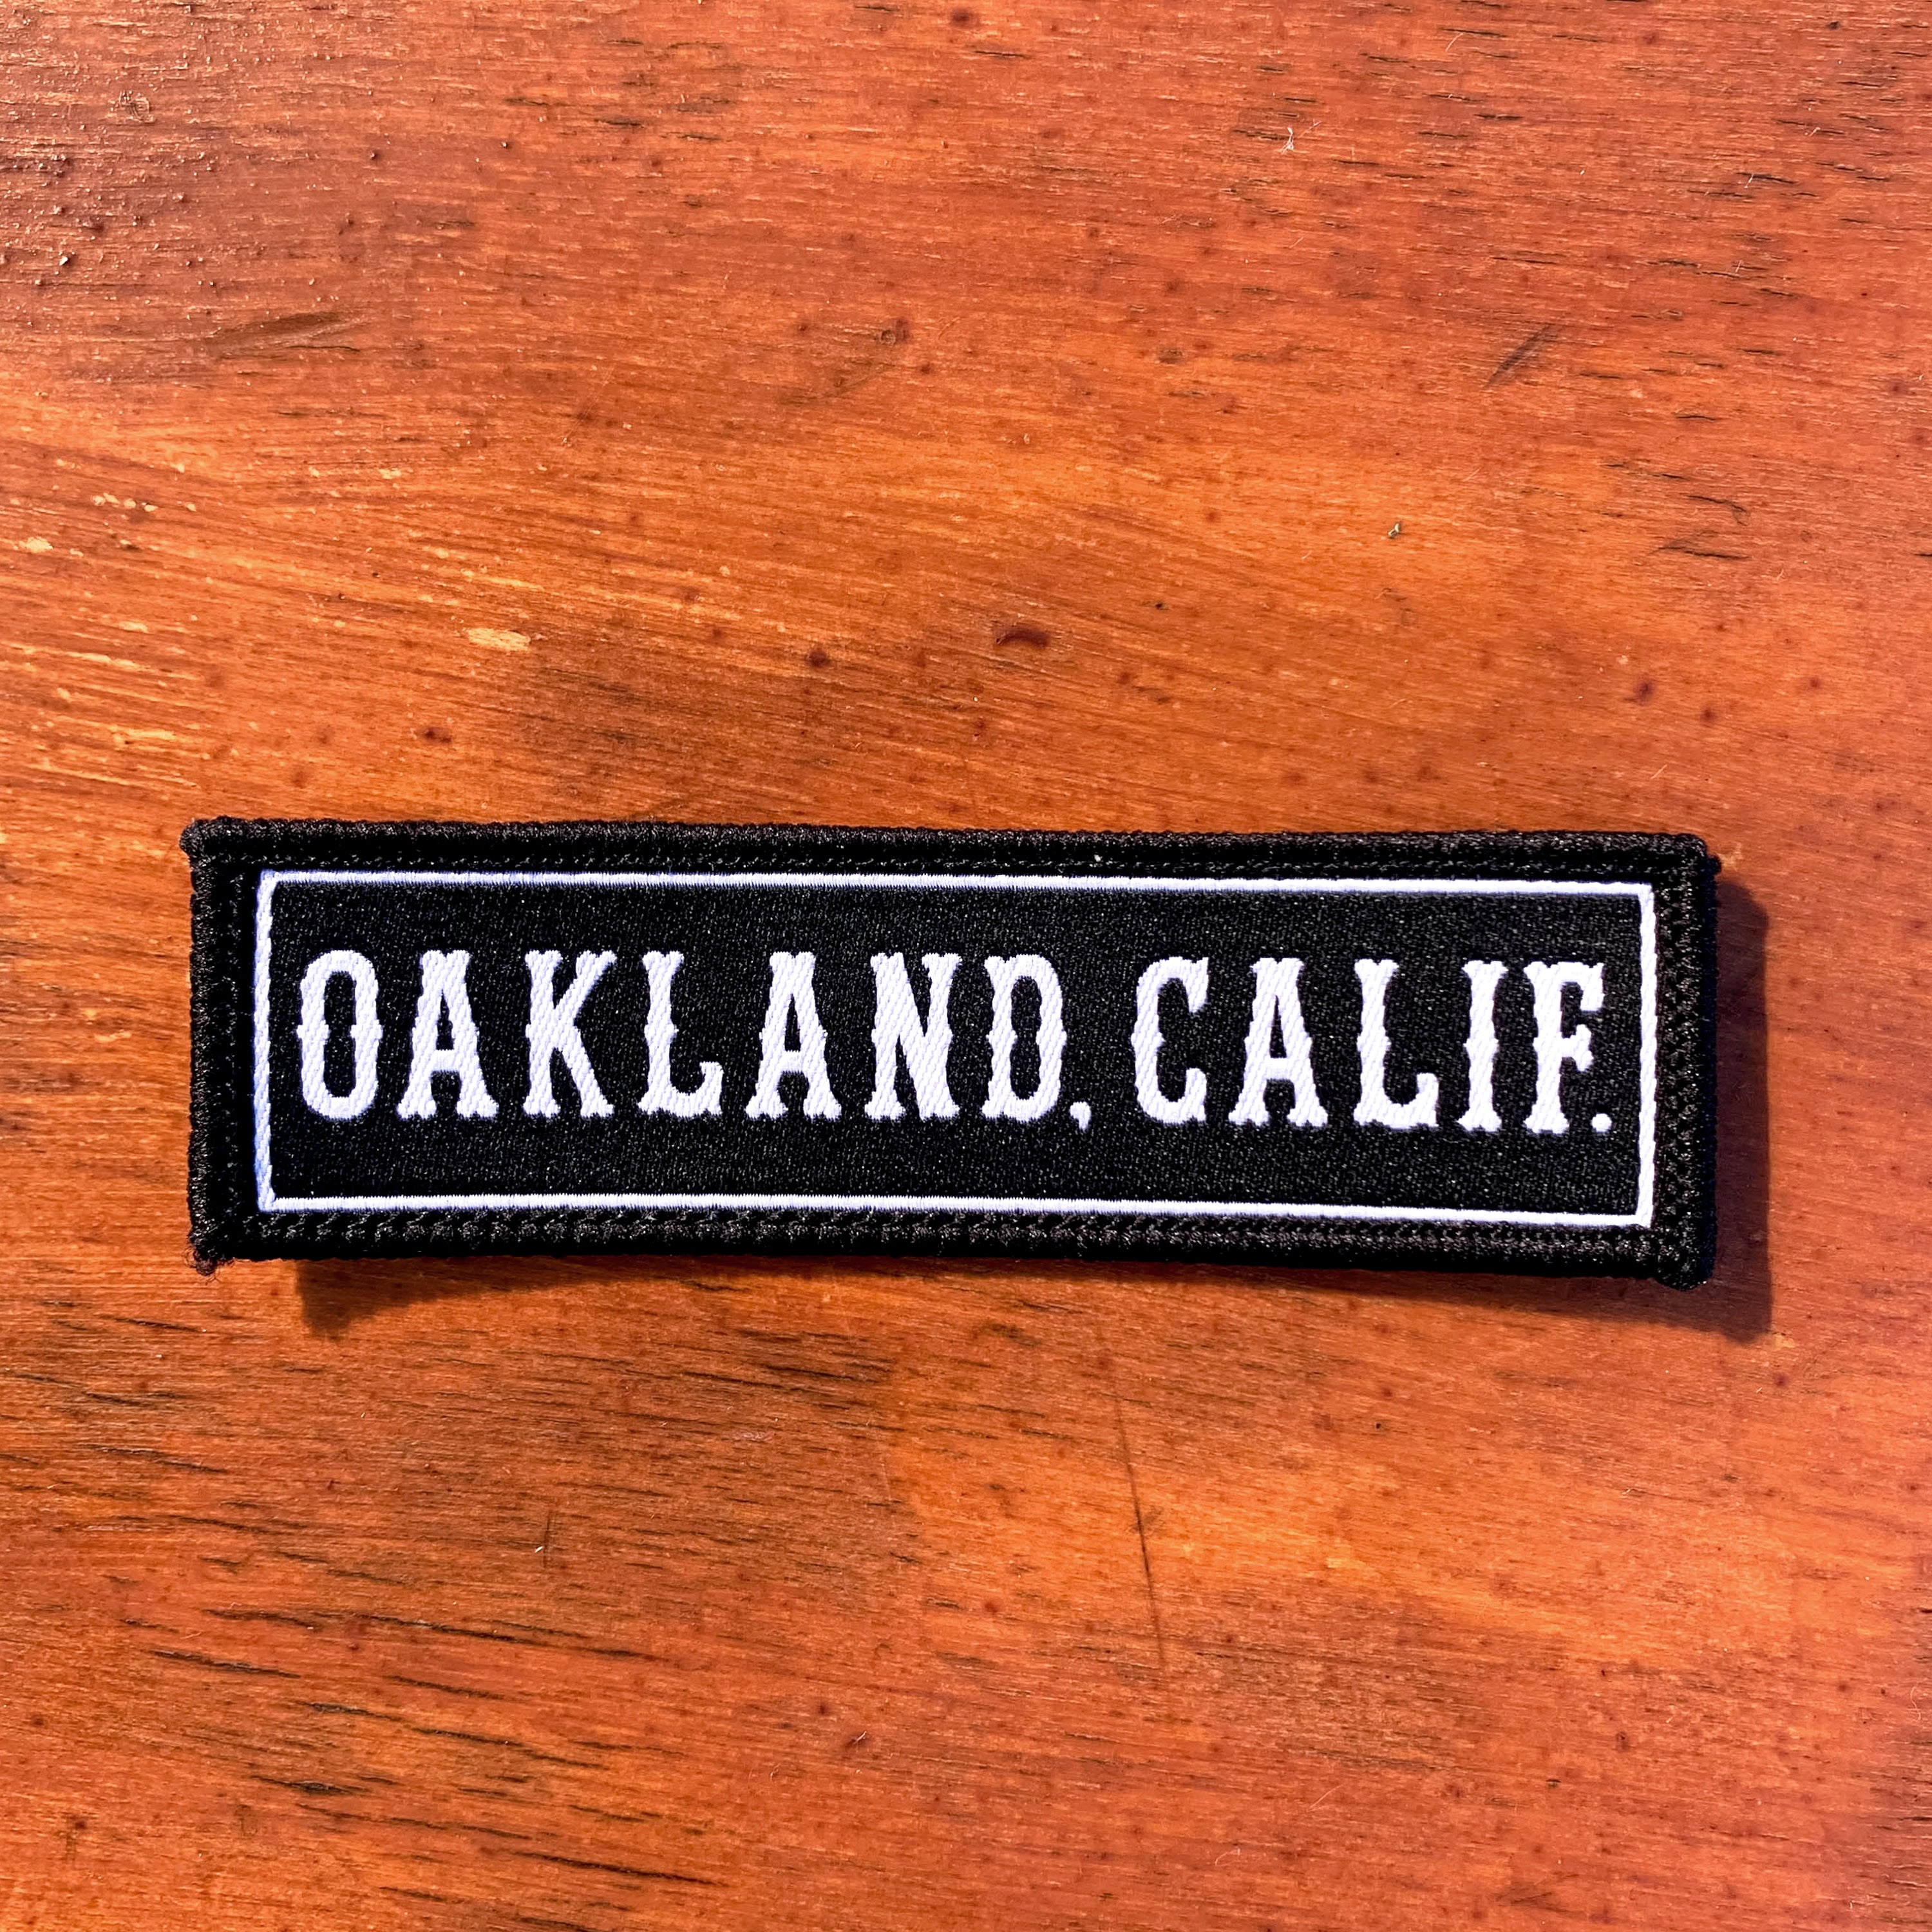 Black rectangle fabric iron patch, outlined with white line and capitalized word mark “OAKLAND. CALIF.” on wood desk.